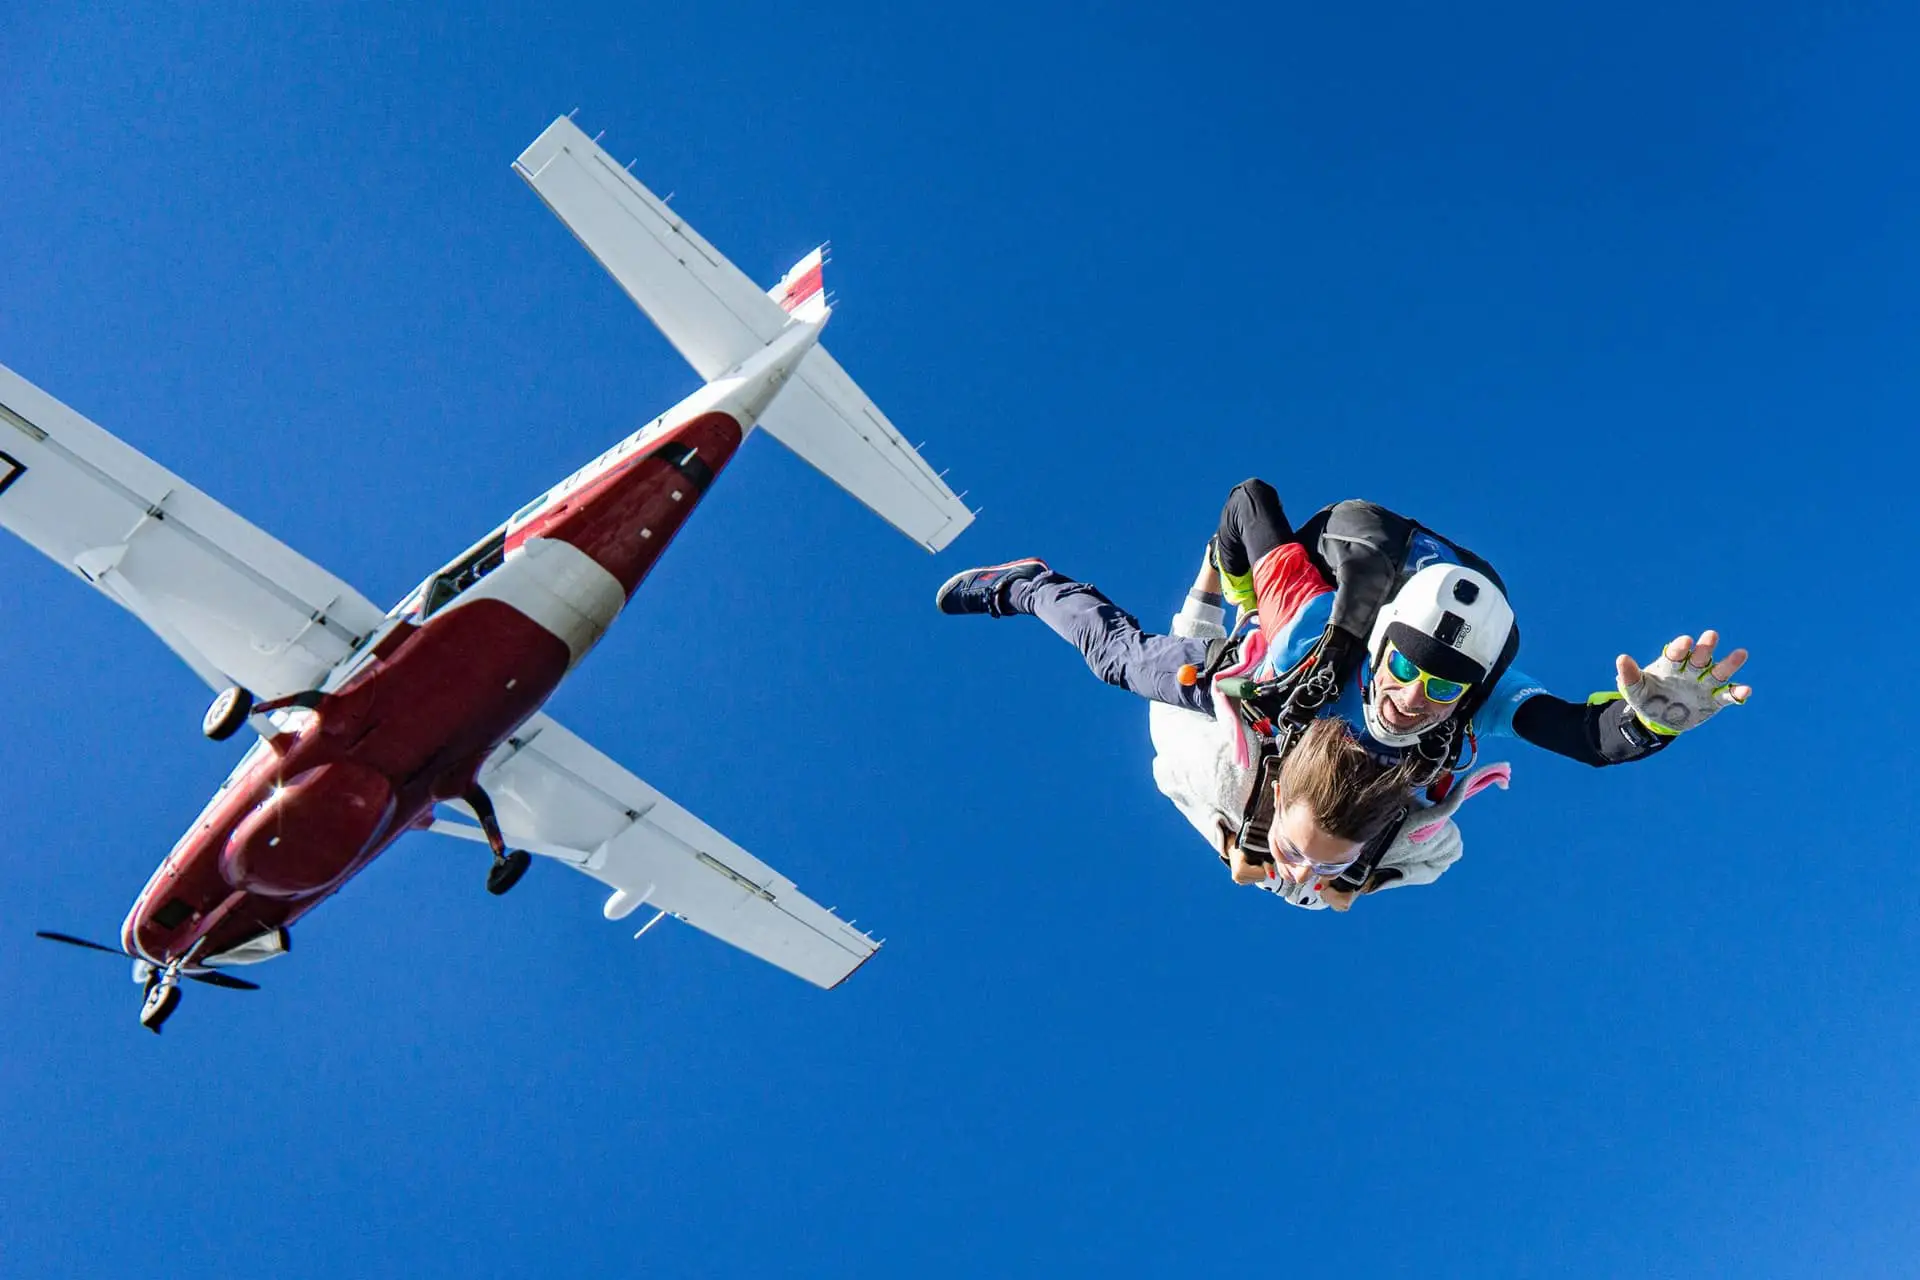 tandem skydive from a small aircraft